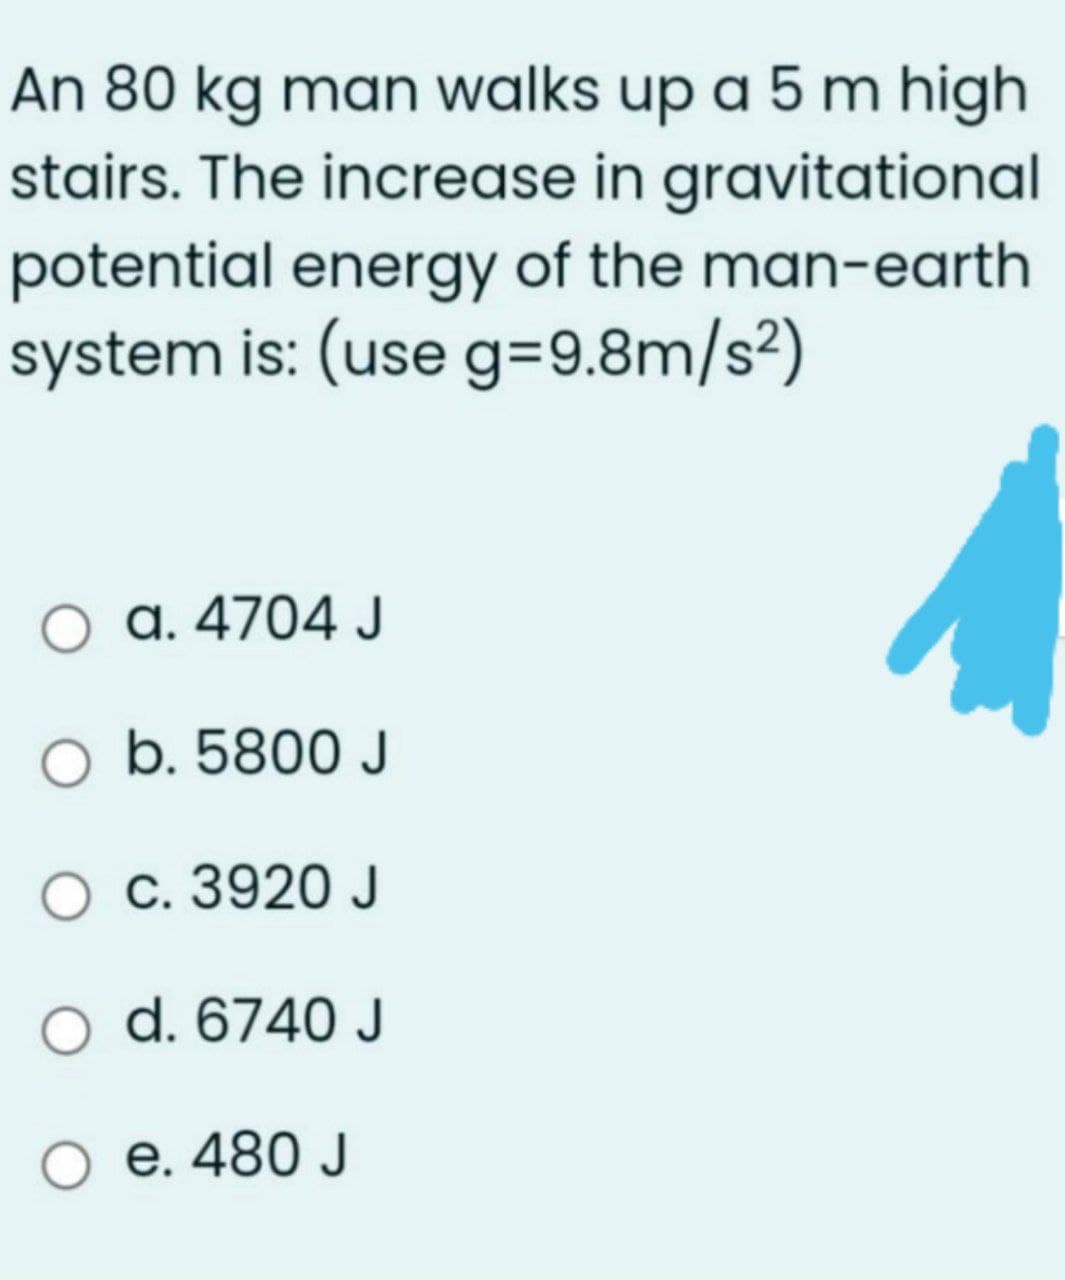 An 80 kg man walks up a 5 m high
stairs. The increase in gravitational
potential energy of the man-earth
system is: (use g=9.8m/s²)
a. 4704 J
O b. 5800 J
O c. 3920 J
d. 6740 J
e. 480 J
